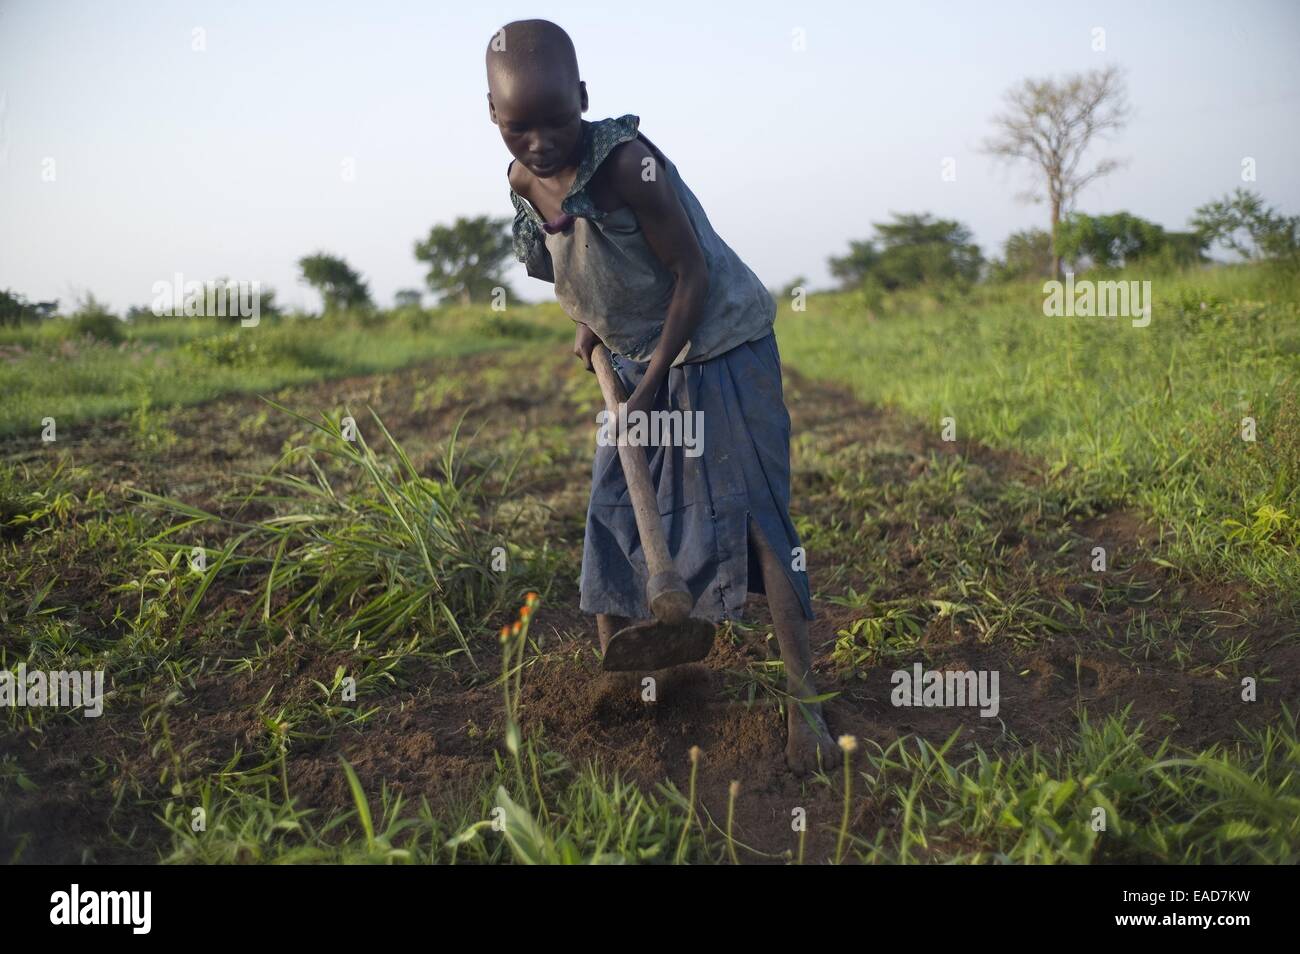 Obolokome Village, Agago District, Uganda. 18th July, 2014. July 18, 2014 - Obolokome Village (Agago District) - Akwero Nighty, 7, must work in a cassava field today instead of going to school because her mother is home with an injured foot. The hidden cost of schooling is overwhelming in the post-conflict Acholi sub-region. Children constitute an invaluable source of stopgap labour for households re-establishing livelihood strategies. © Ric Francis/ZUMA Wire/Alamy Live News Stock Photo